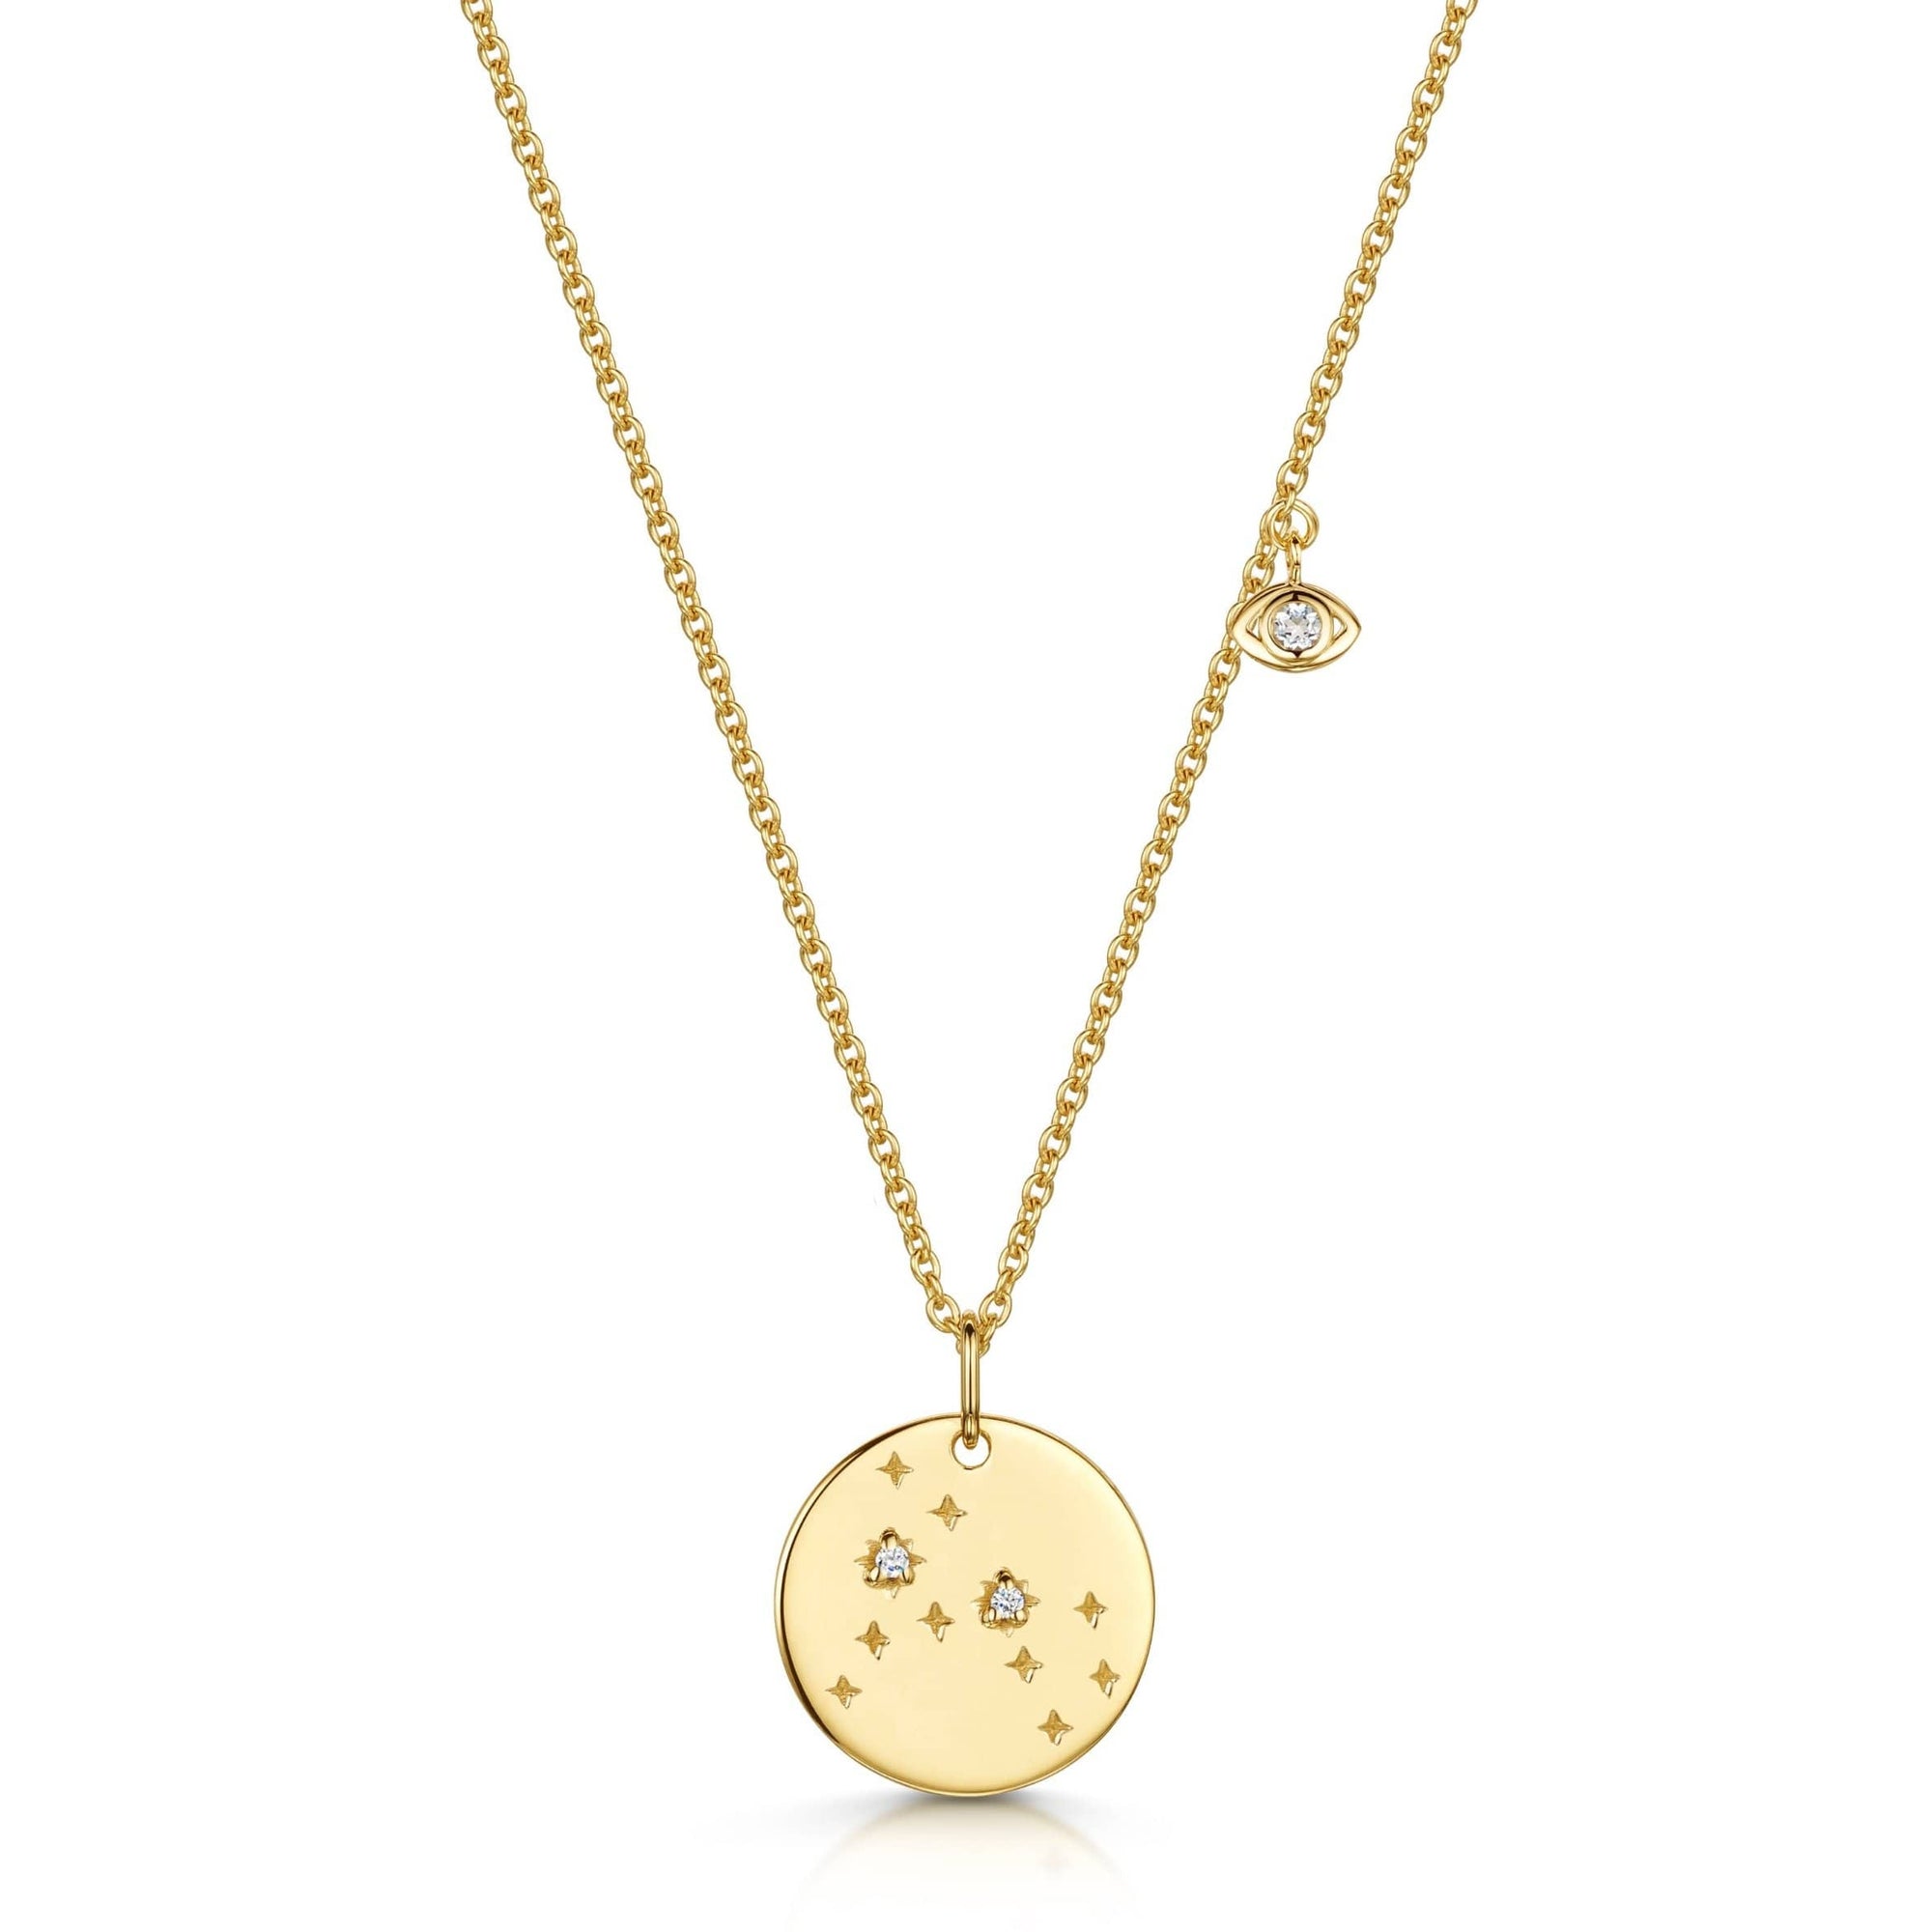 Fervor Montreal Necklace Pisces Double-Sided Zodiac & Constellation Necklace